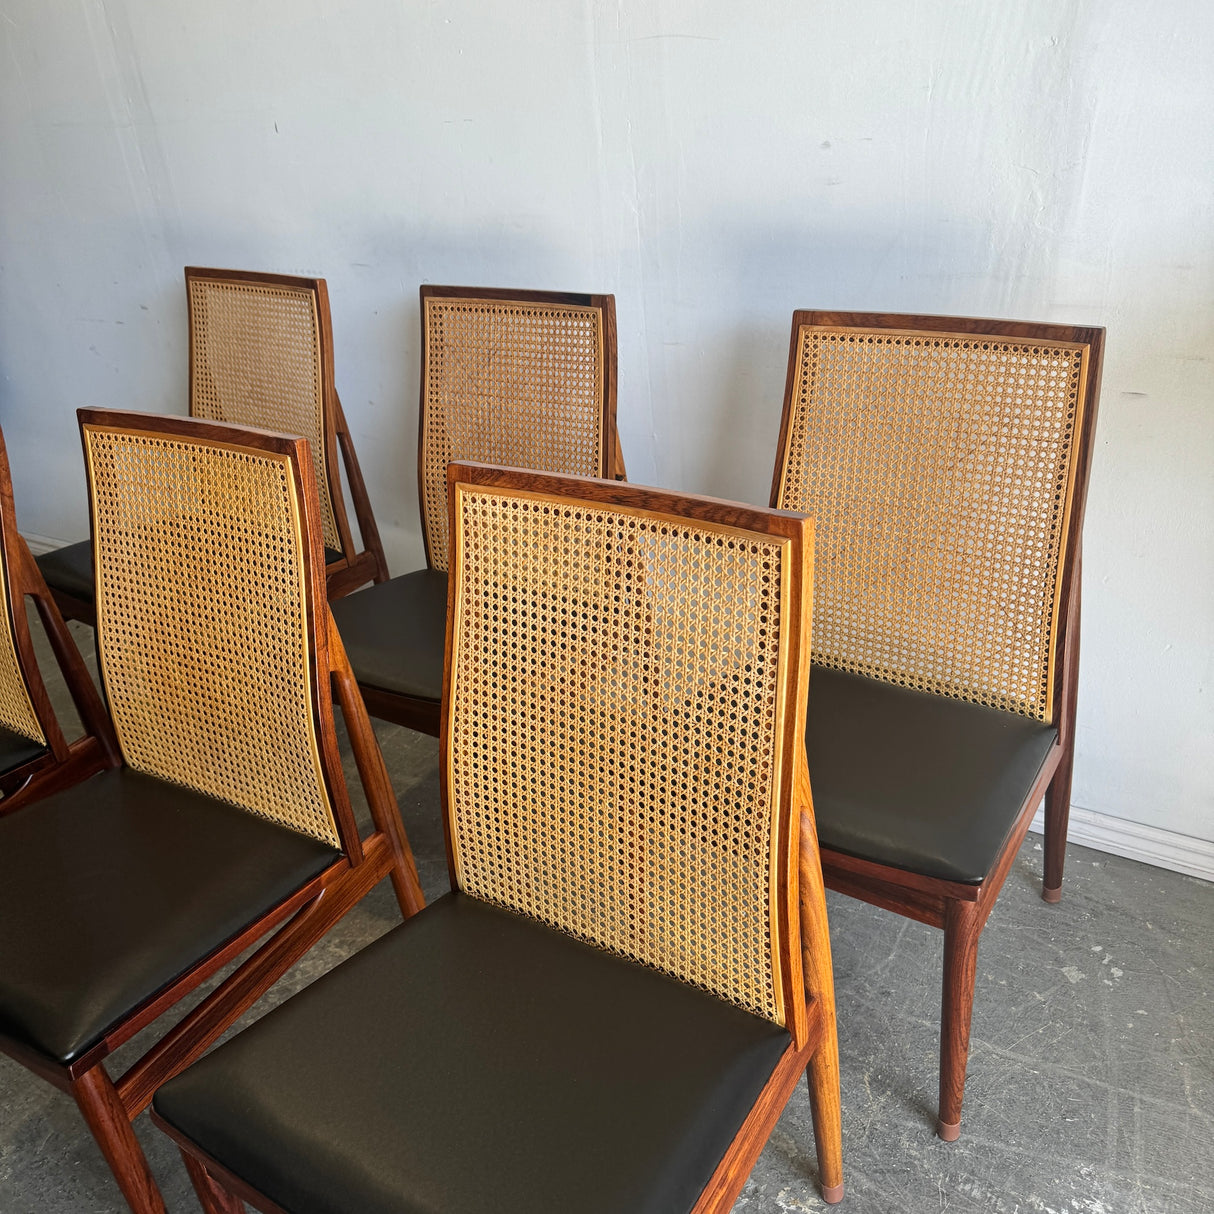 Danish Modern Set of 6 Rosewood, Cane Dining Chairs by Dyrlund